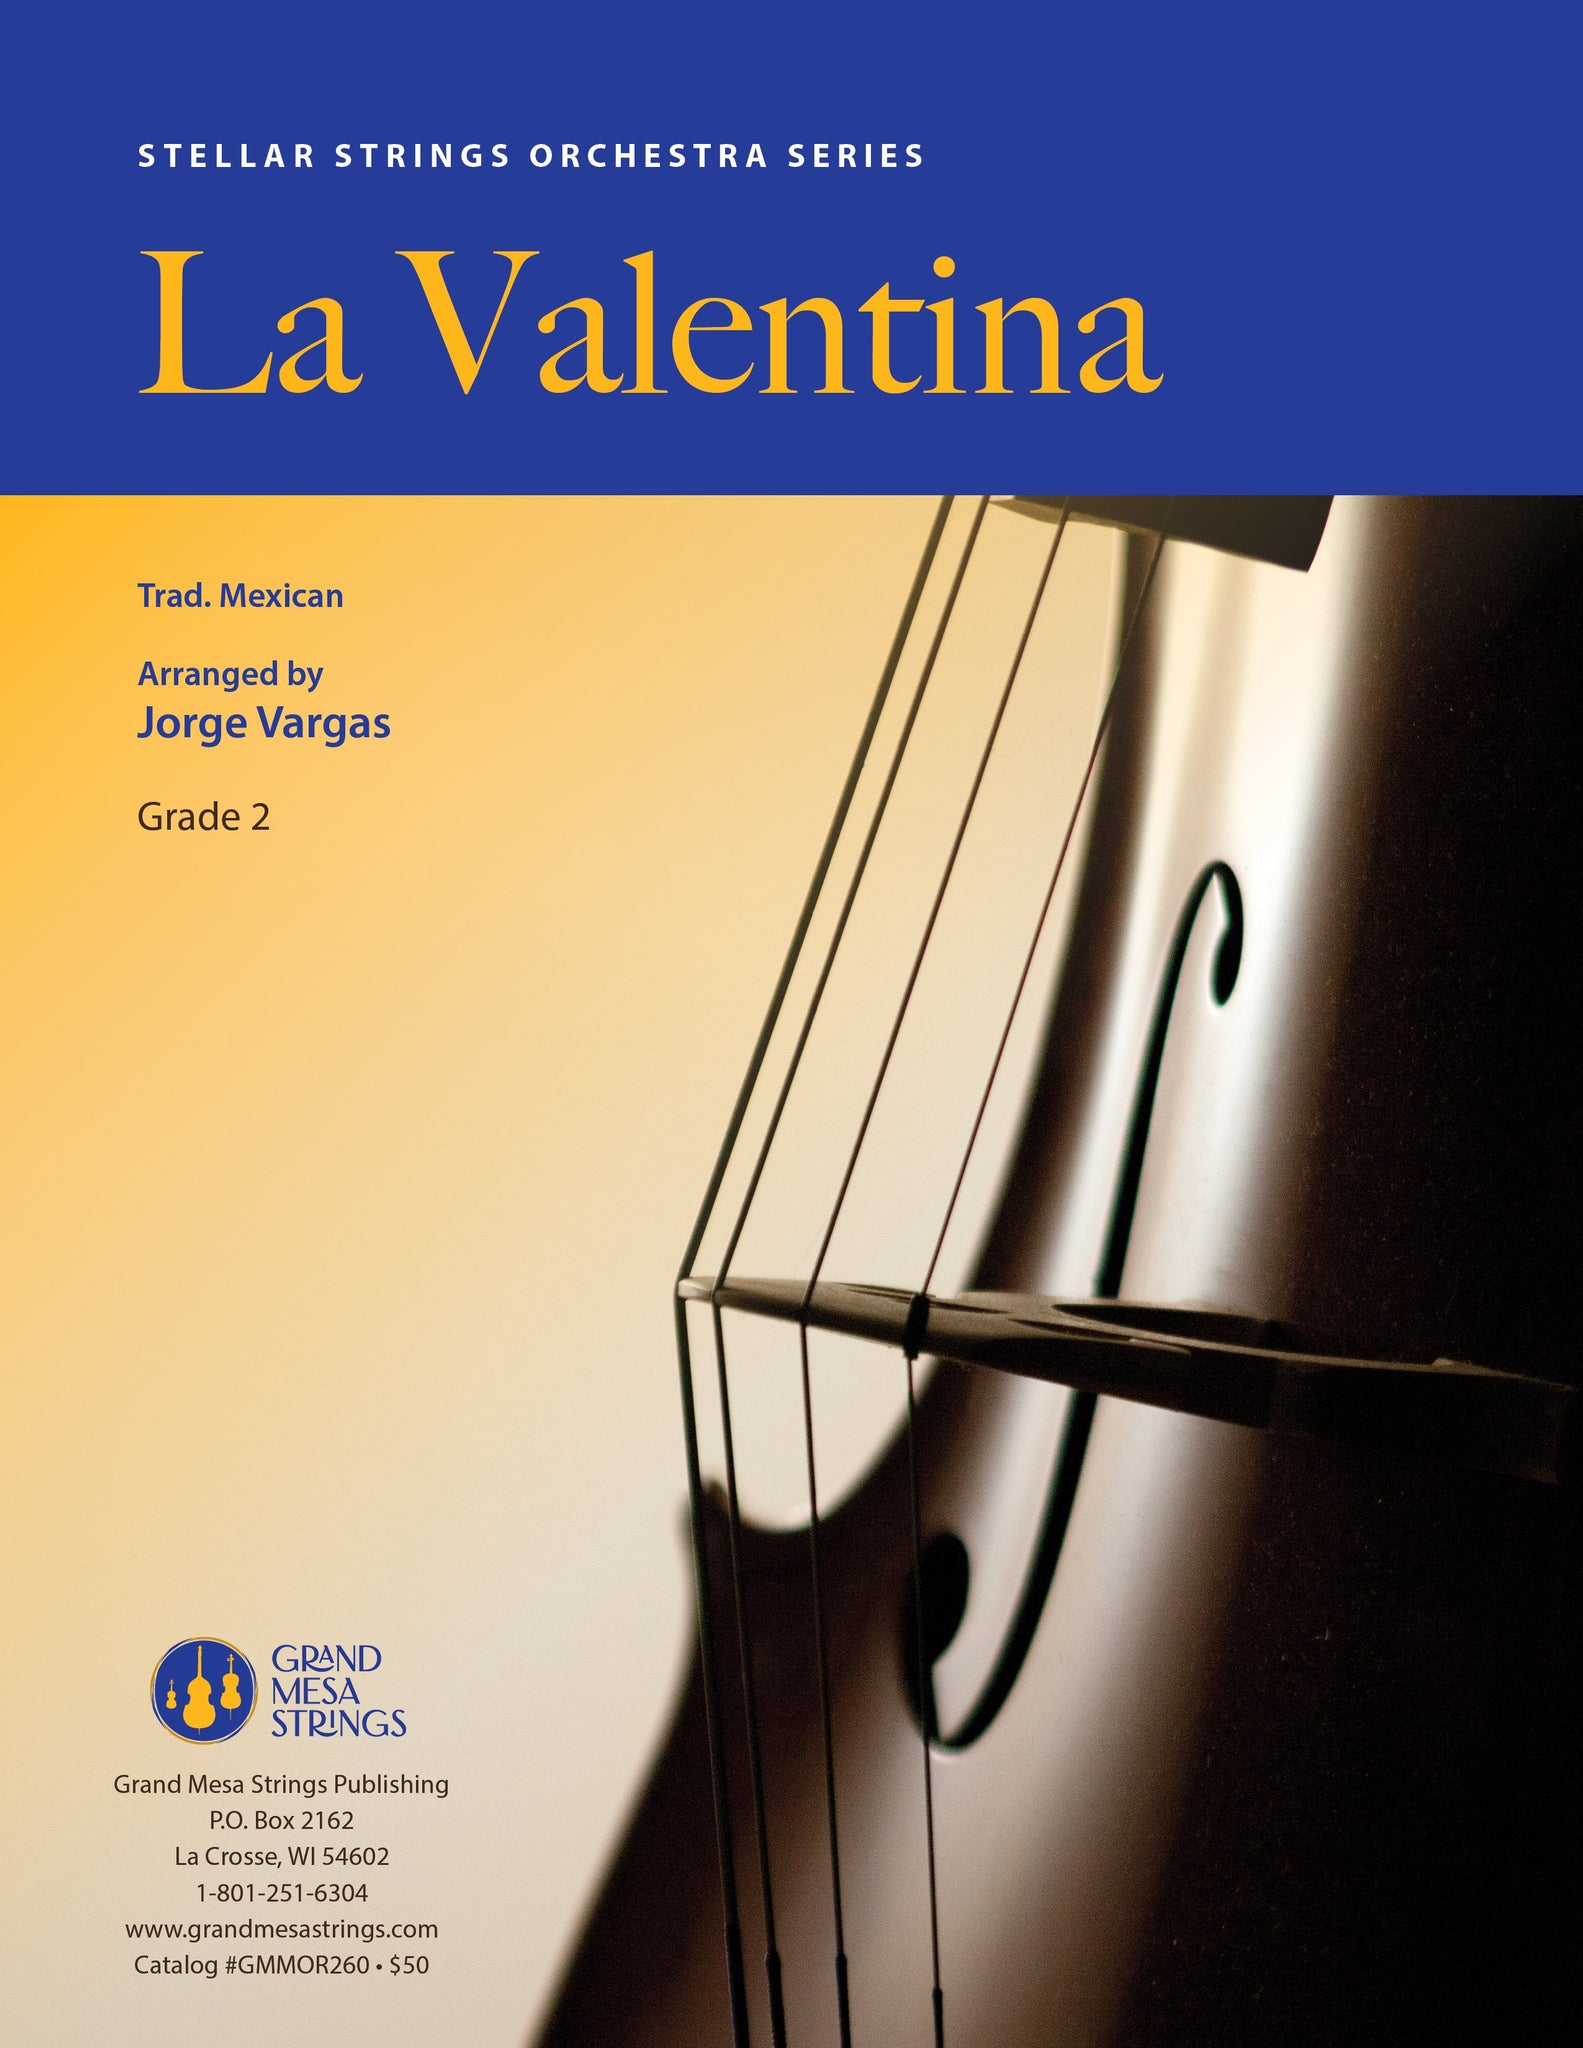 Strings sheet music cover of La Valentina, composed by Jorge Vargas.